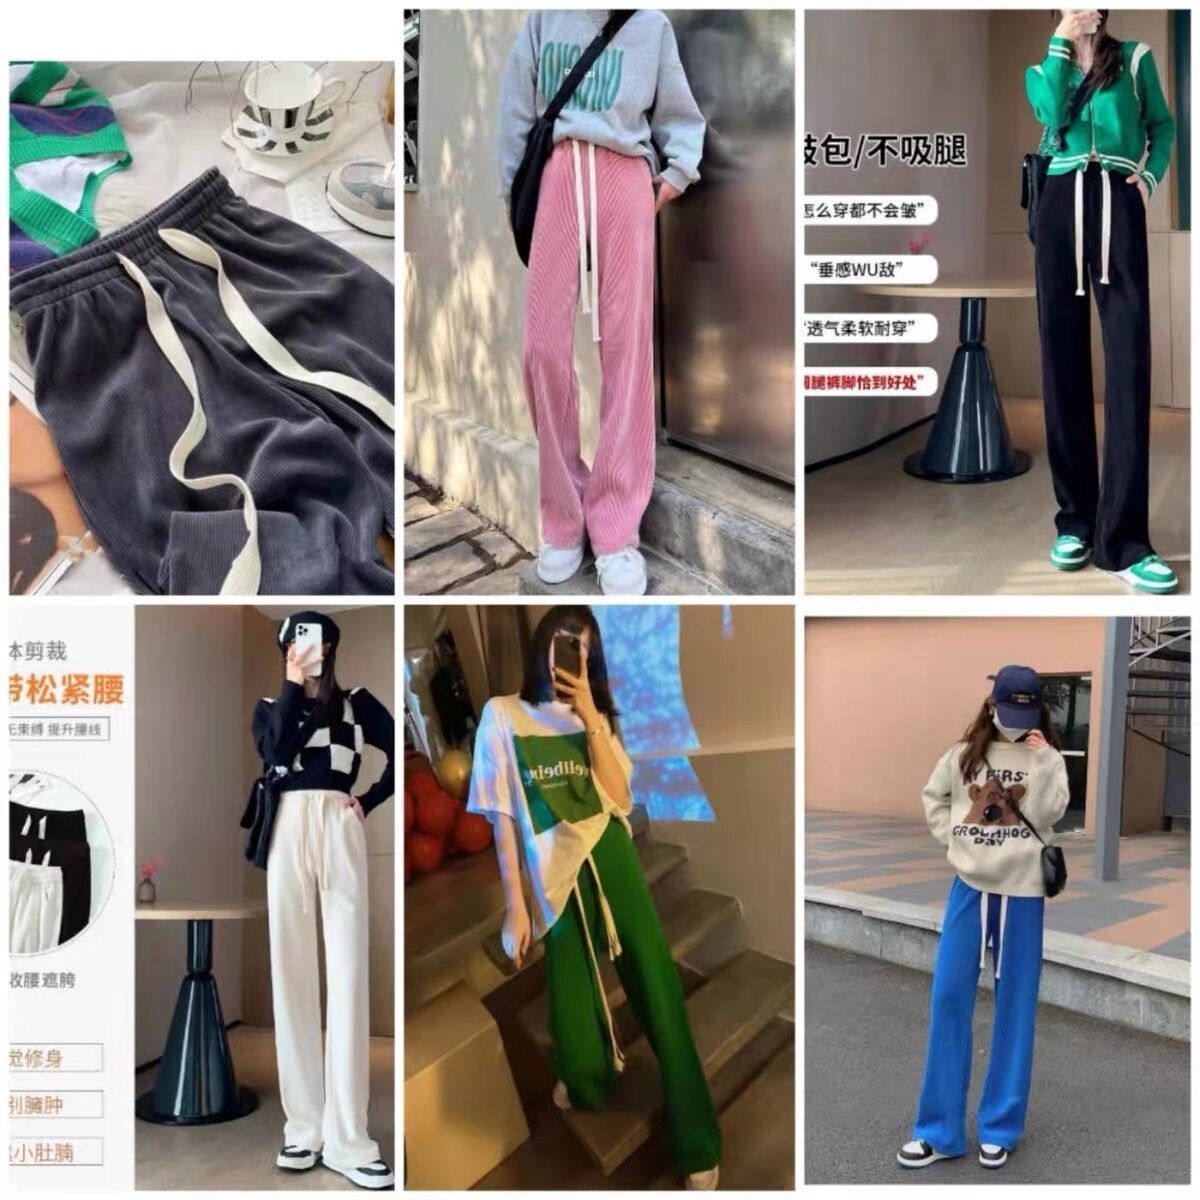 [Impervious] Ice Silk Wide Leg Pants for Small Women Summer Thin High Waisted Loose Draping Nine-Point Straight Casual Pants